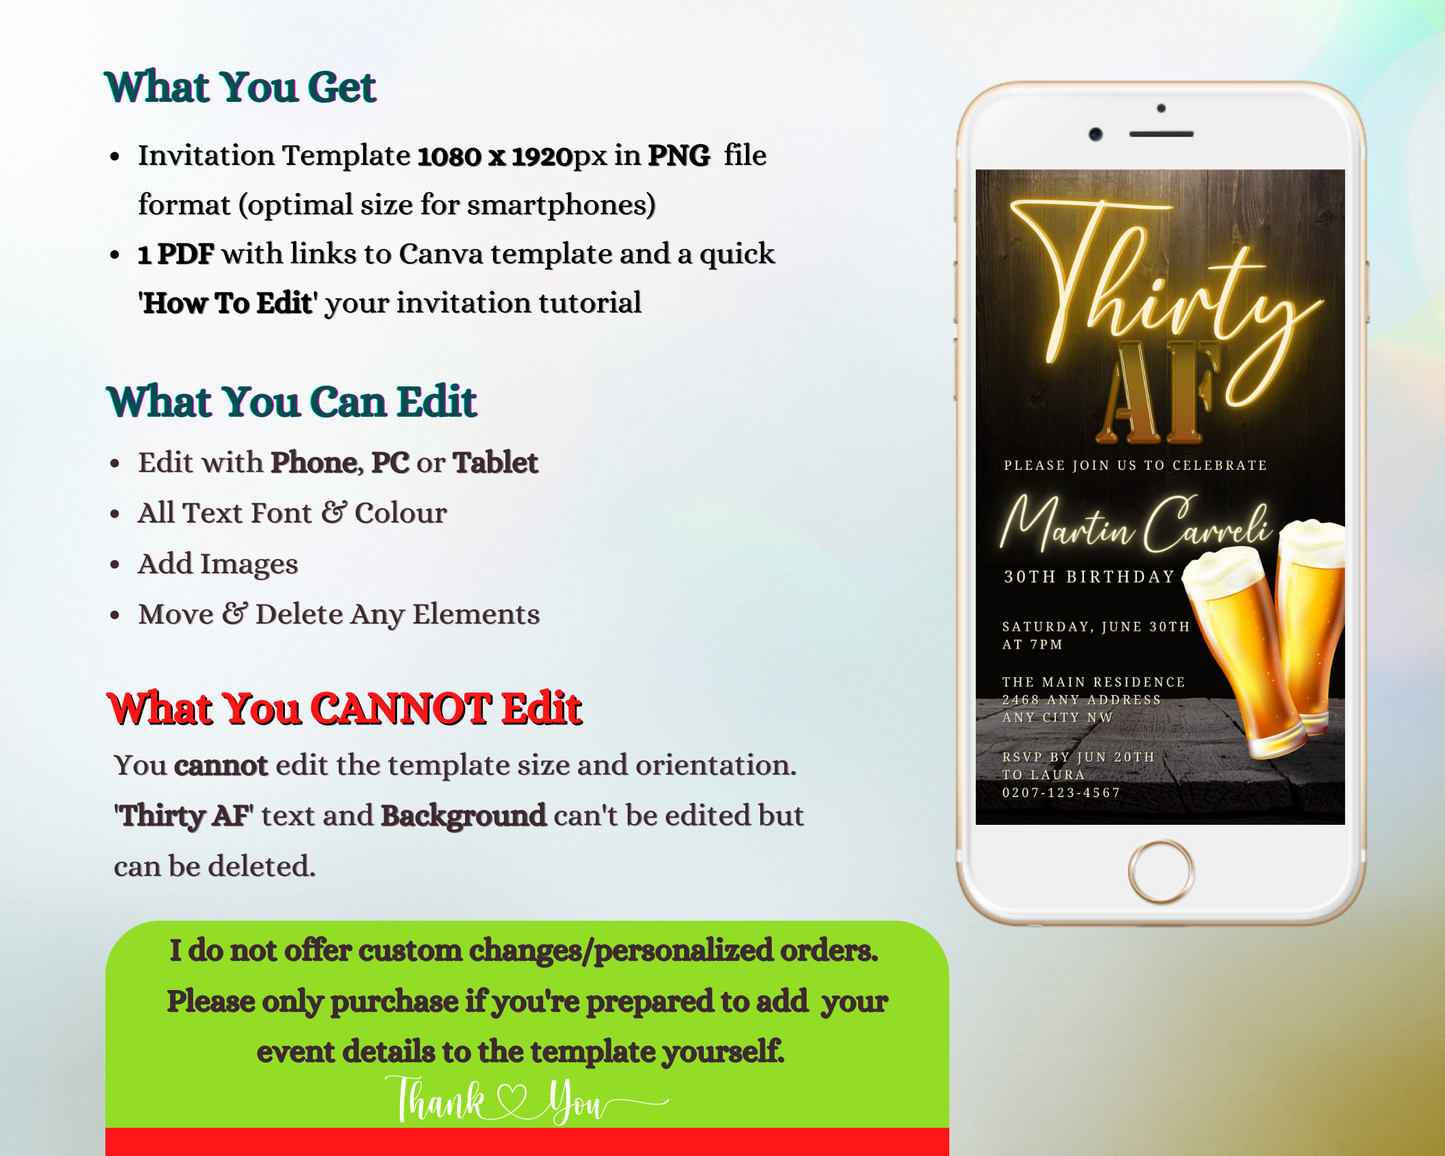 Neon Gold Beer | 30AF Birthday Evite displayed on a smartphone, showcasing customizable digital invitation for events via Canva.